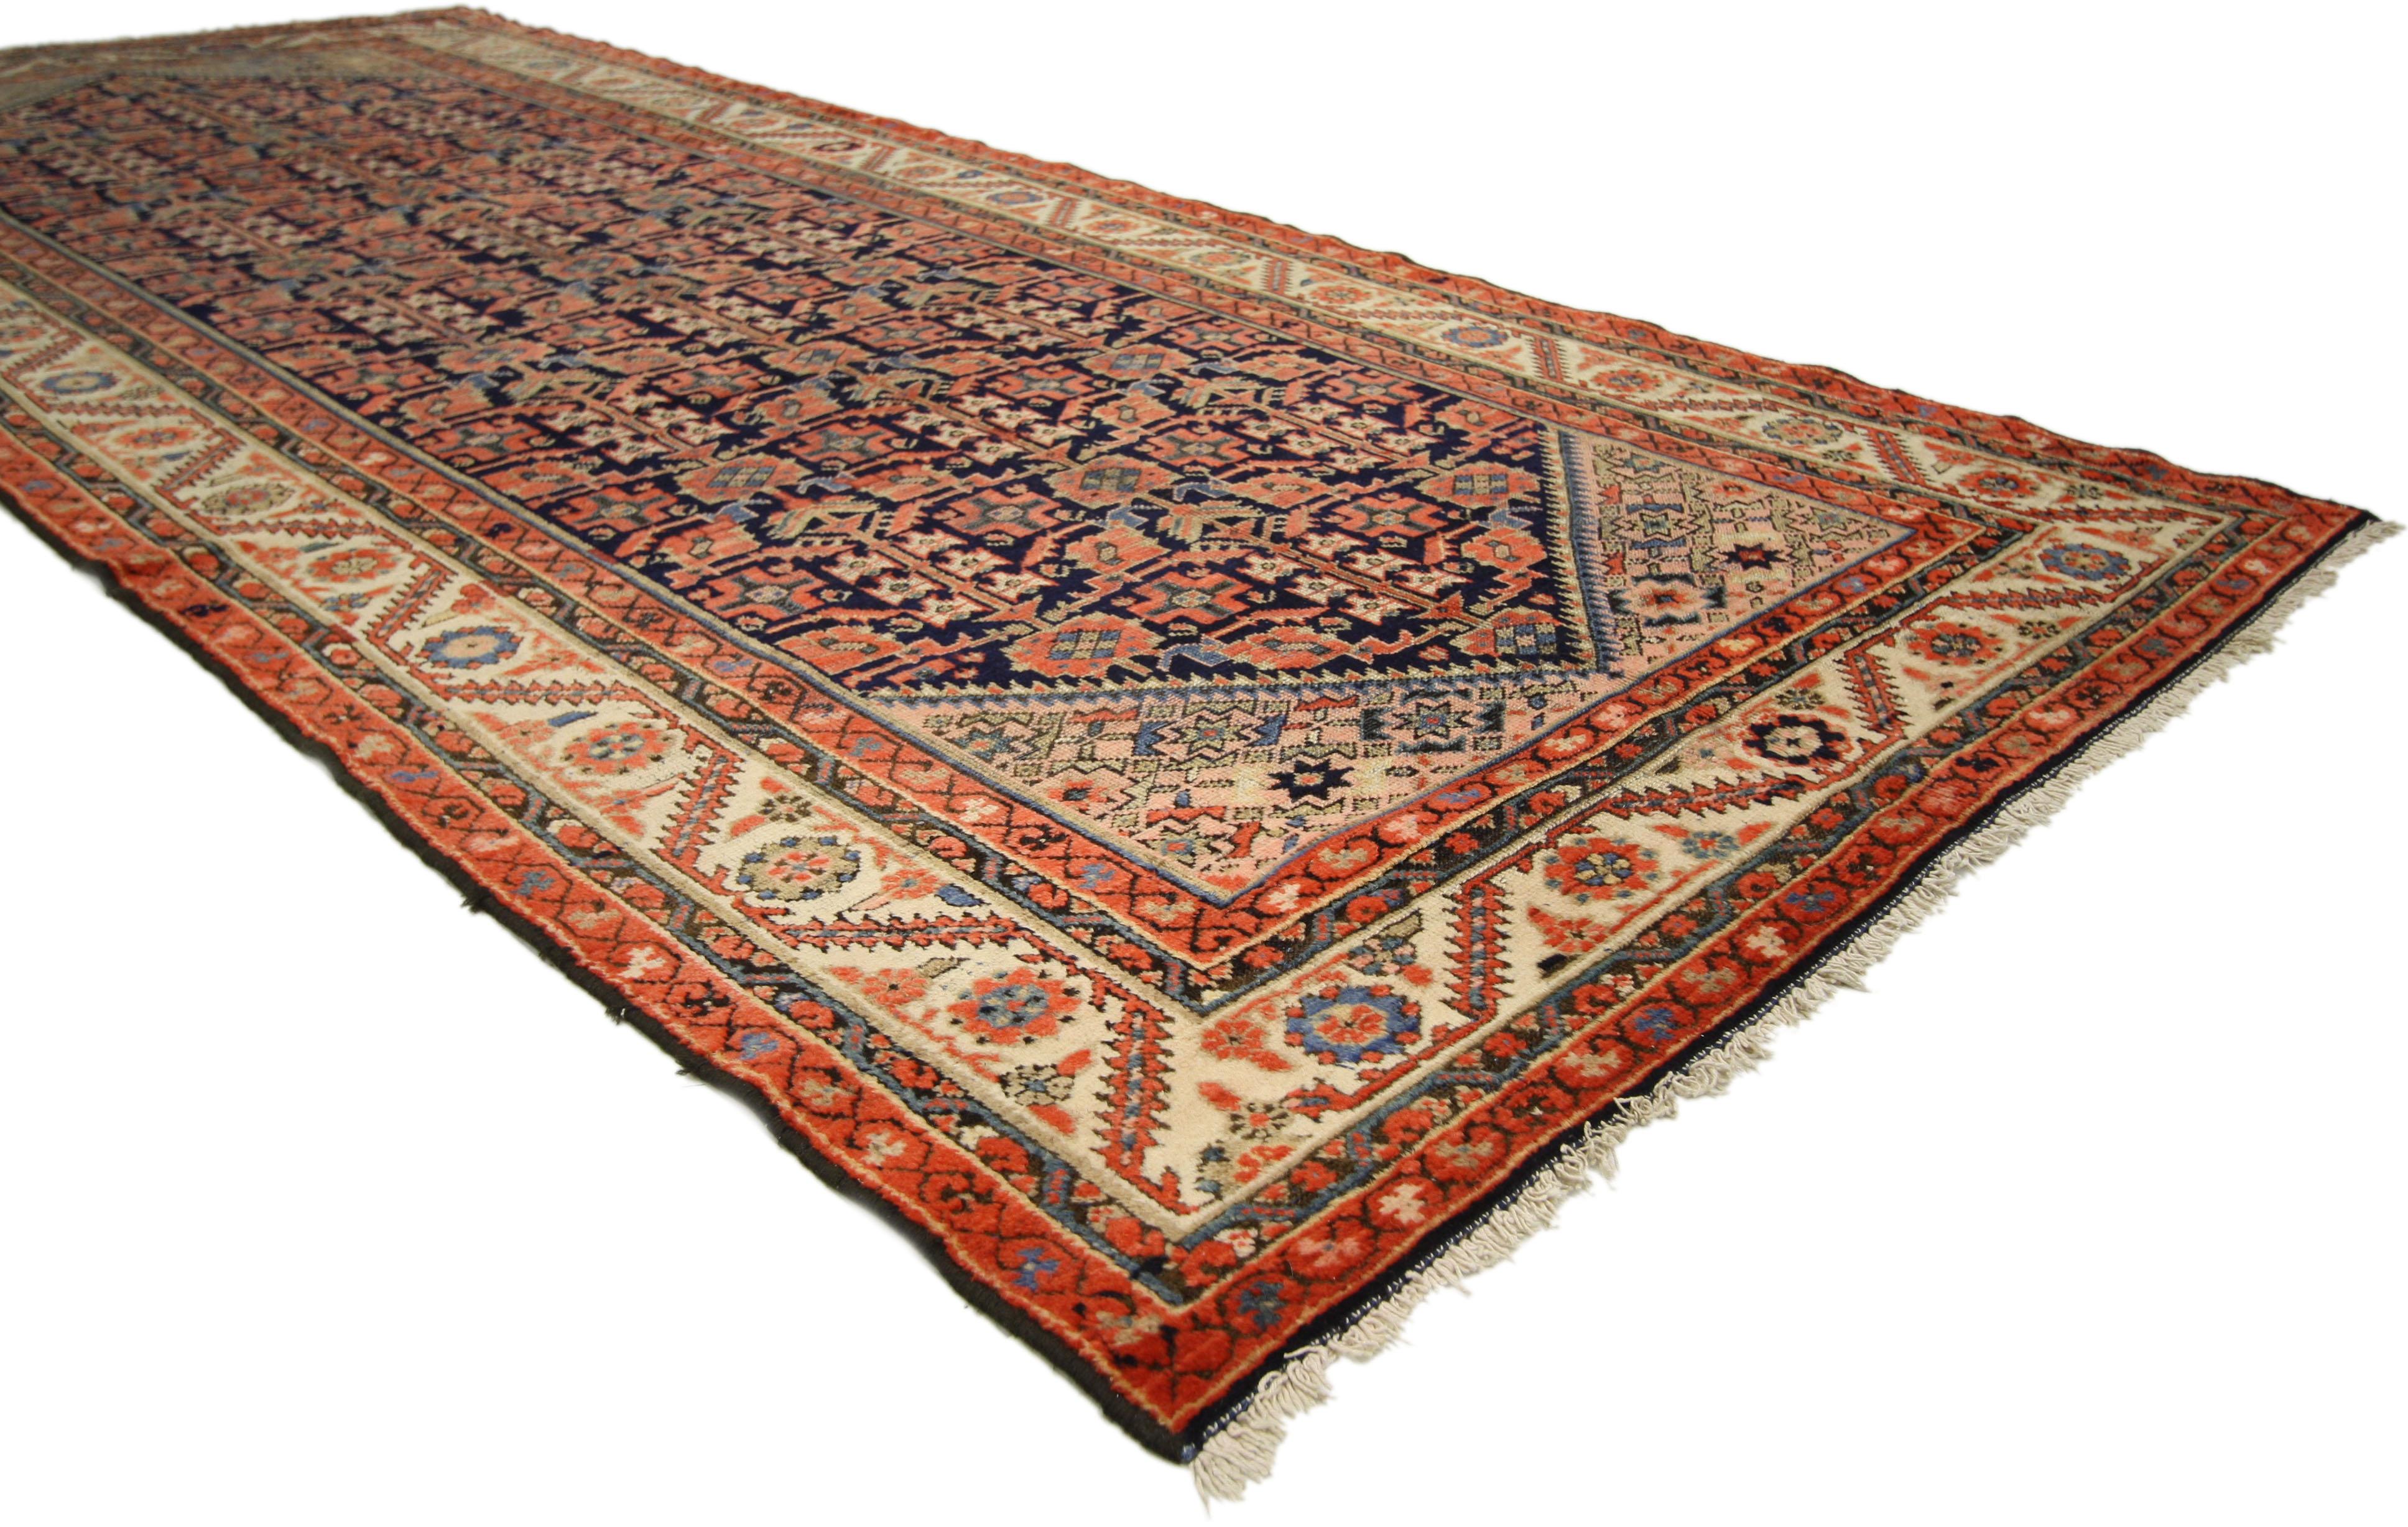 74945 Vintage Persian Malayer Gallery Rug with Guli Hinnai Flower, Wide Hallway Runner. This classic Persian Malayer rug features a repeating geometric floral pattern composed of the Guli Henna which is the Flower of Hinnai also known as Guli